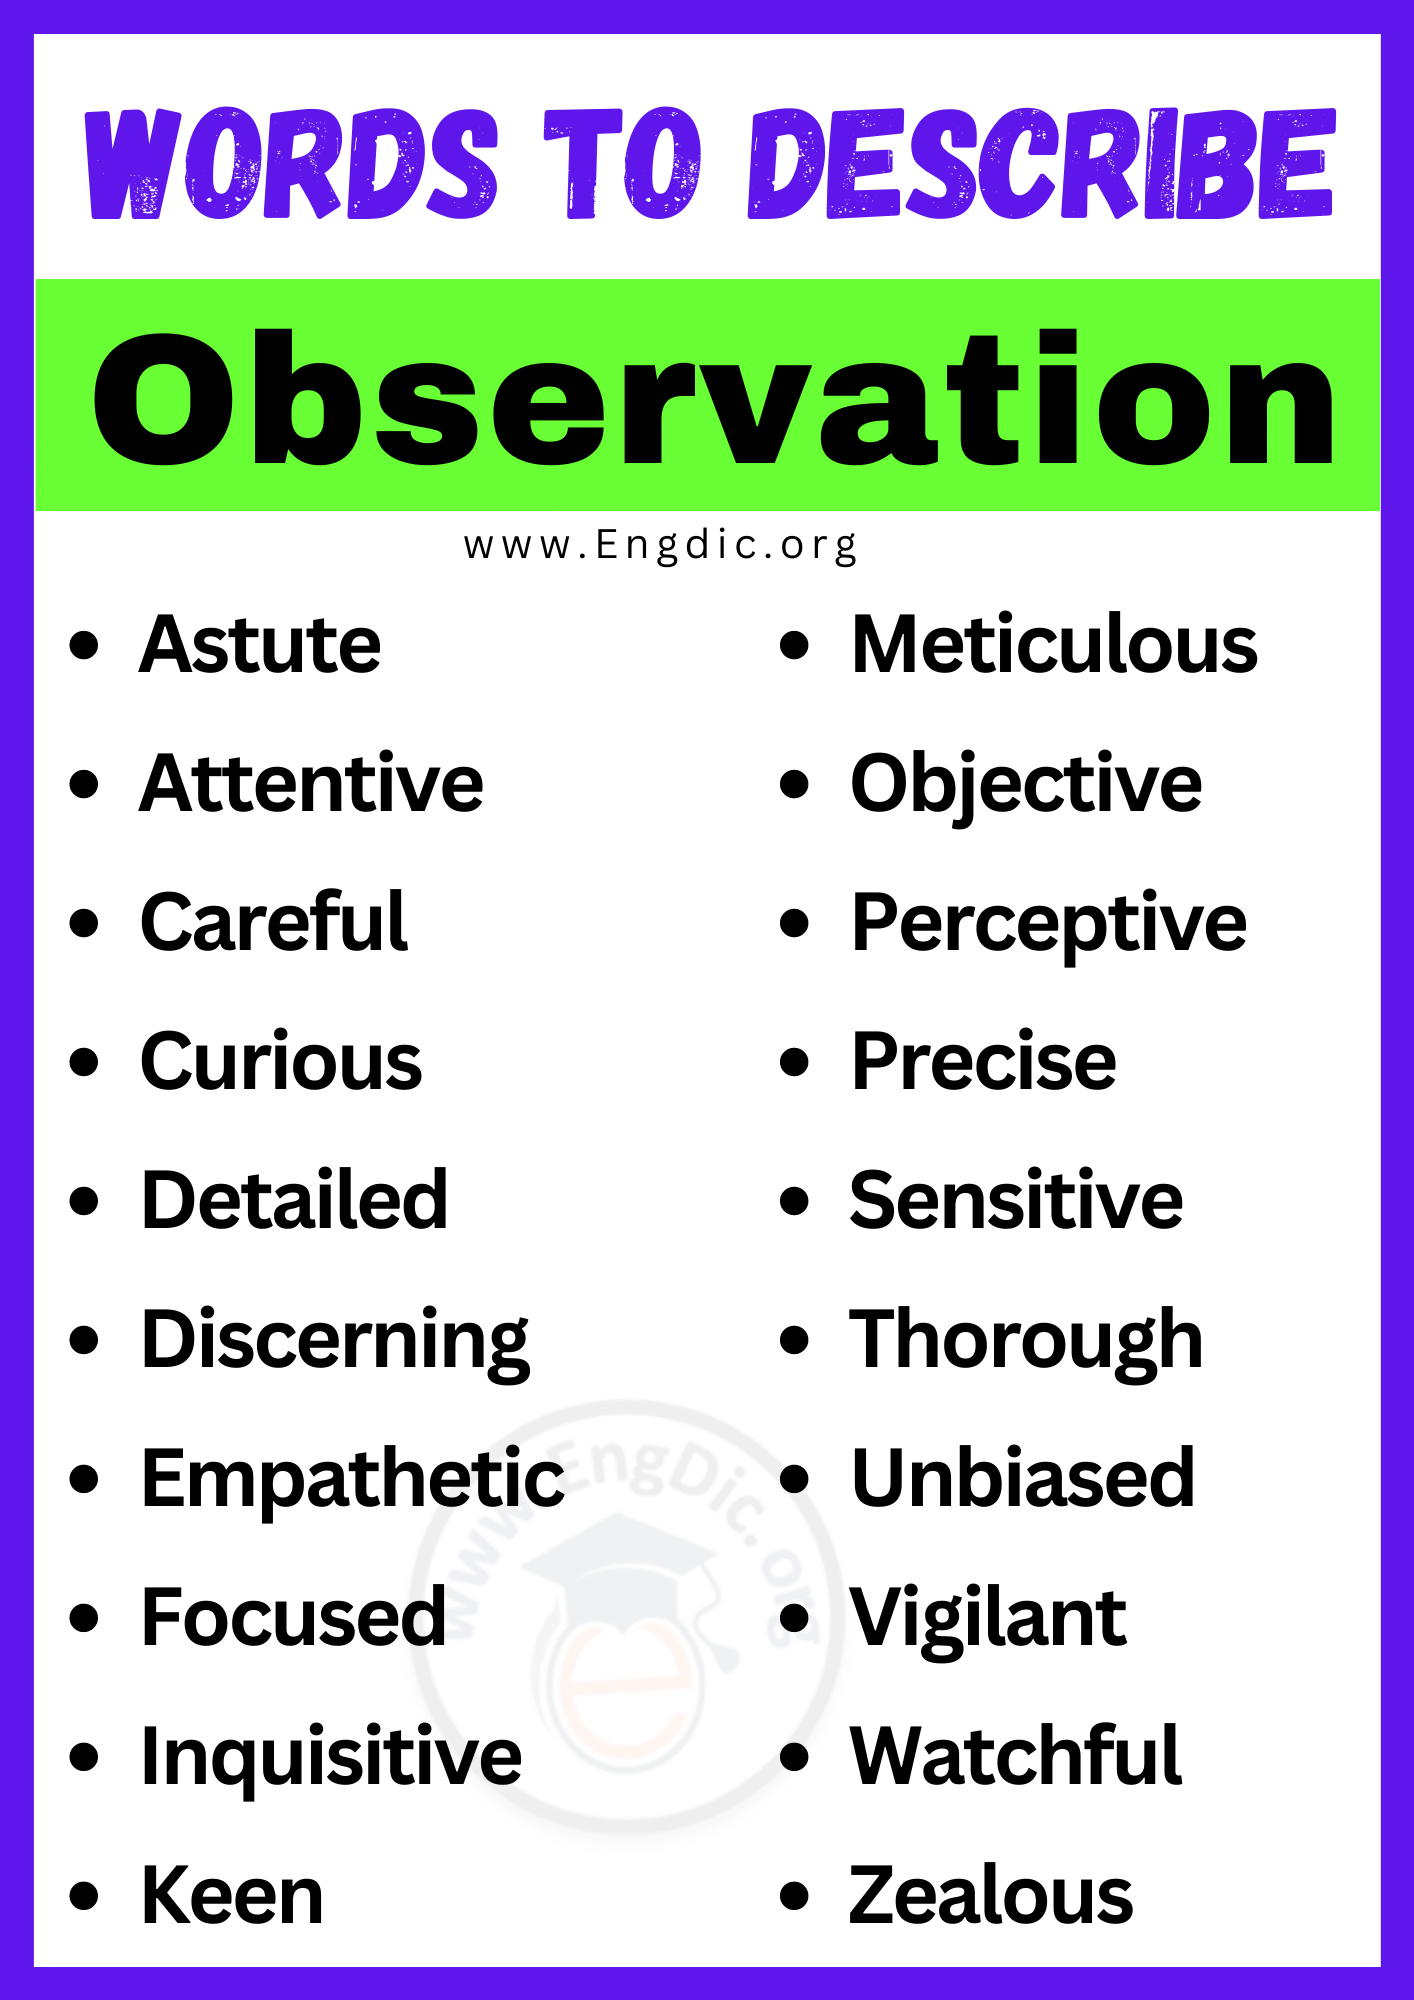 Words to Describe Observation